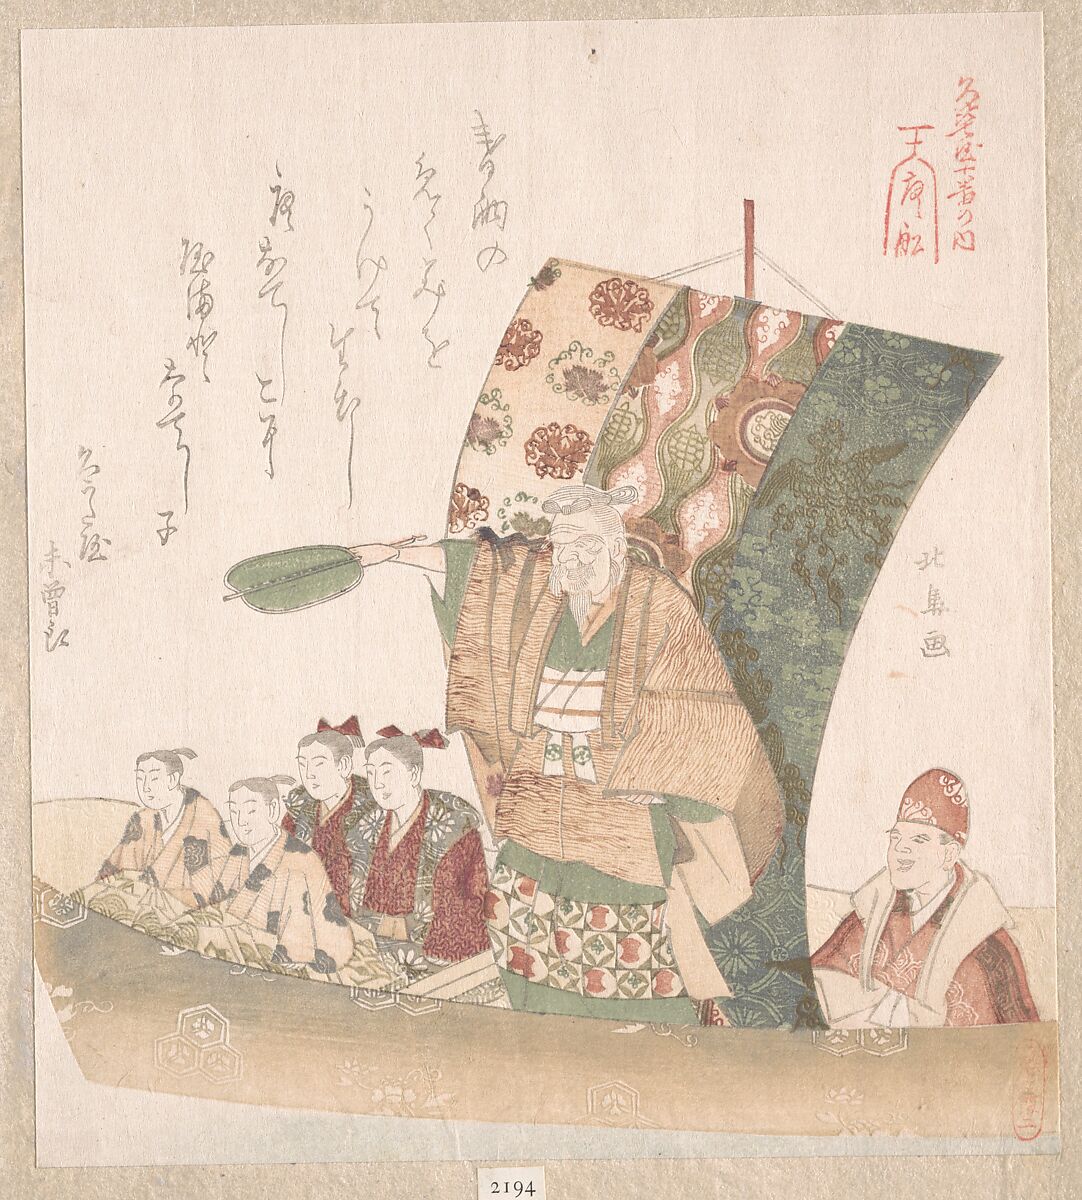 Boat of Good Fortune, Teisai Hokuba (Japanese, 1771–1844), Woodblock print (surimono); ink and color on paper, Japan 